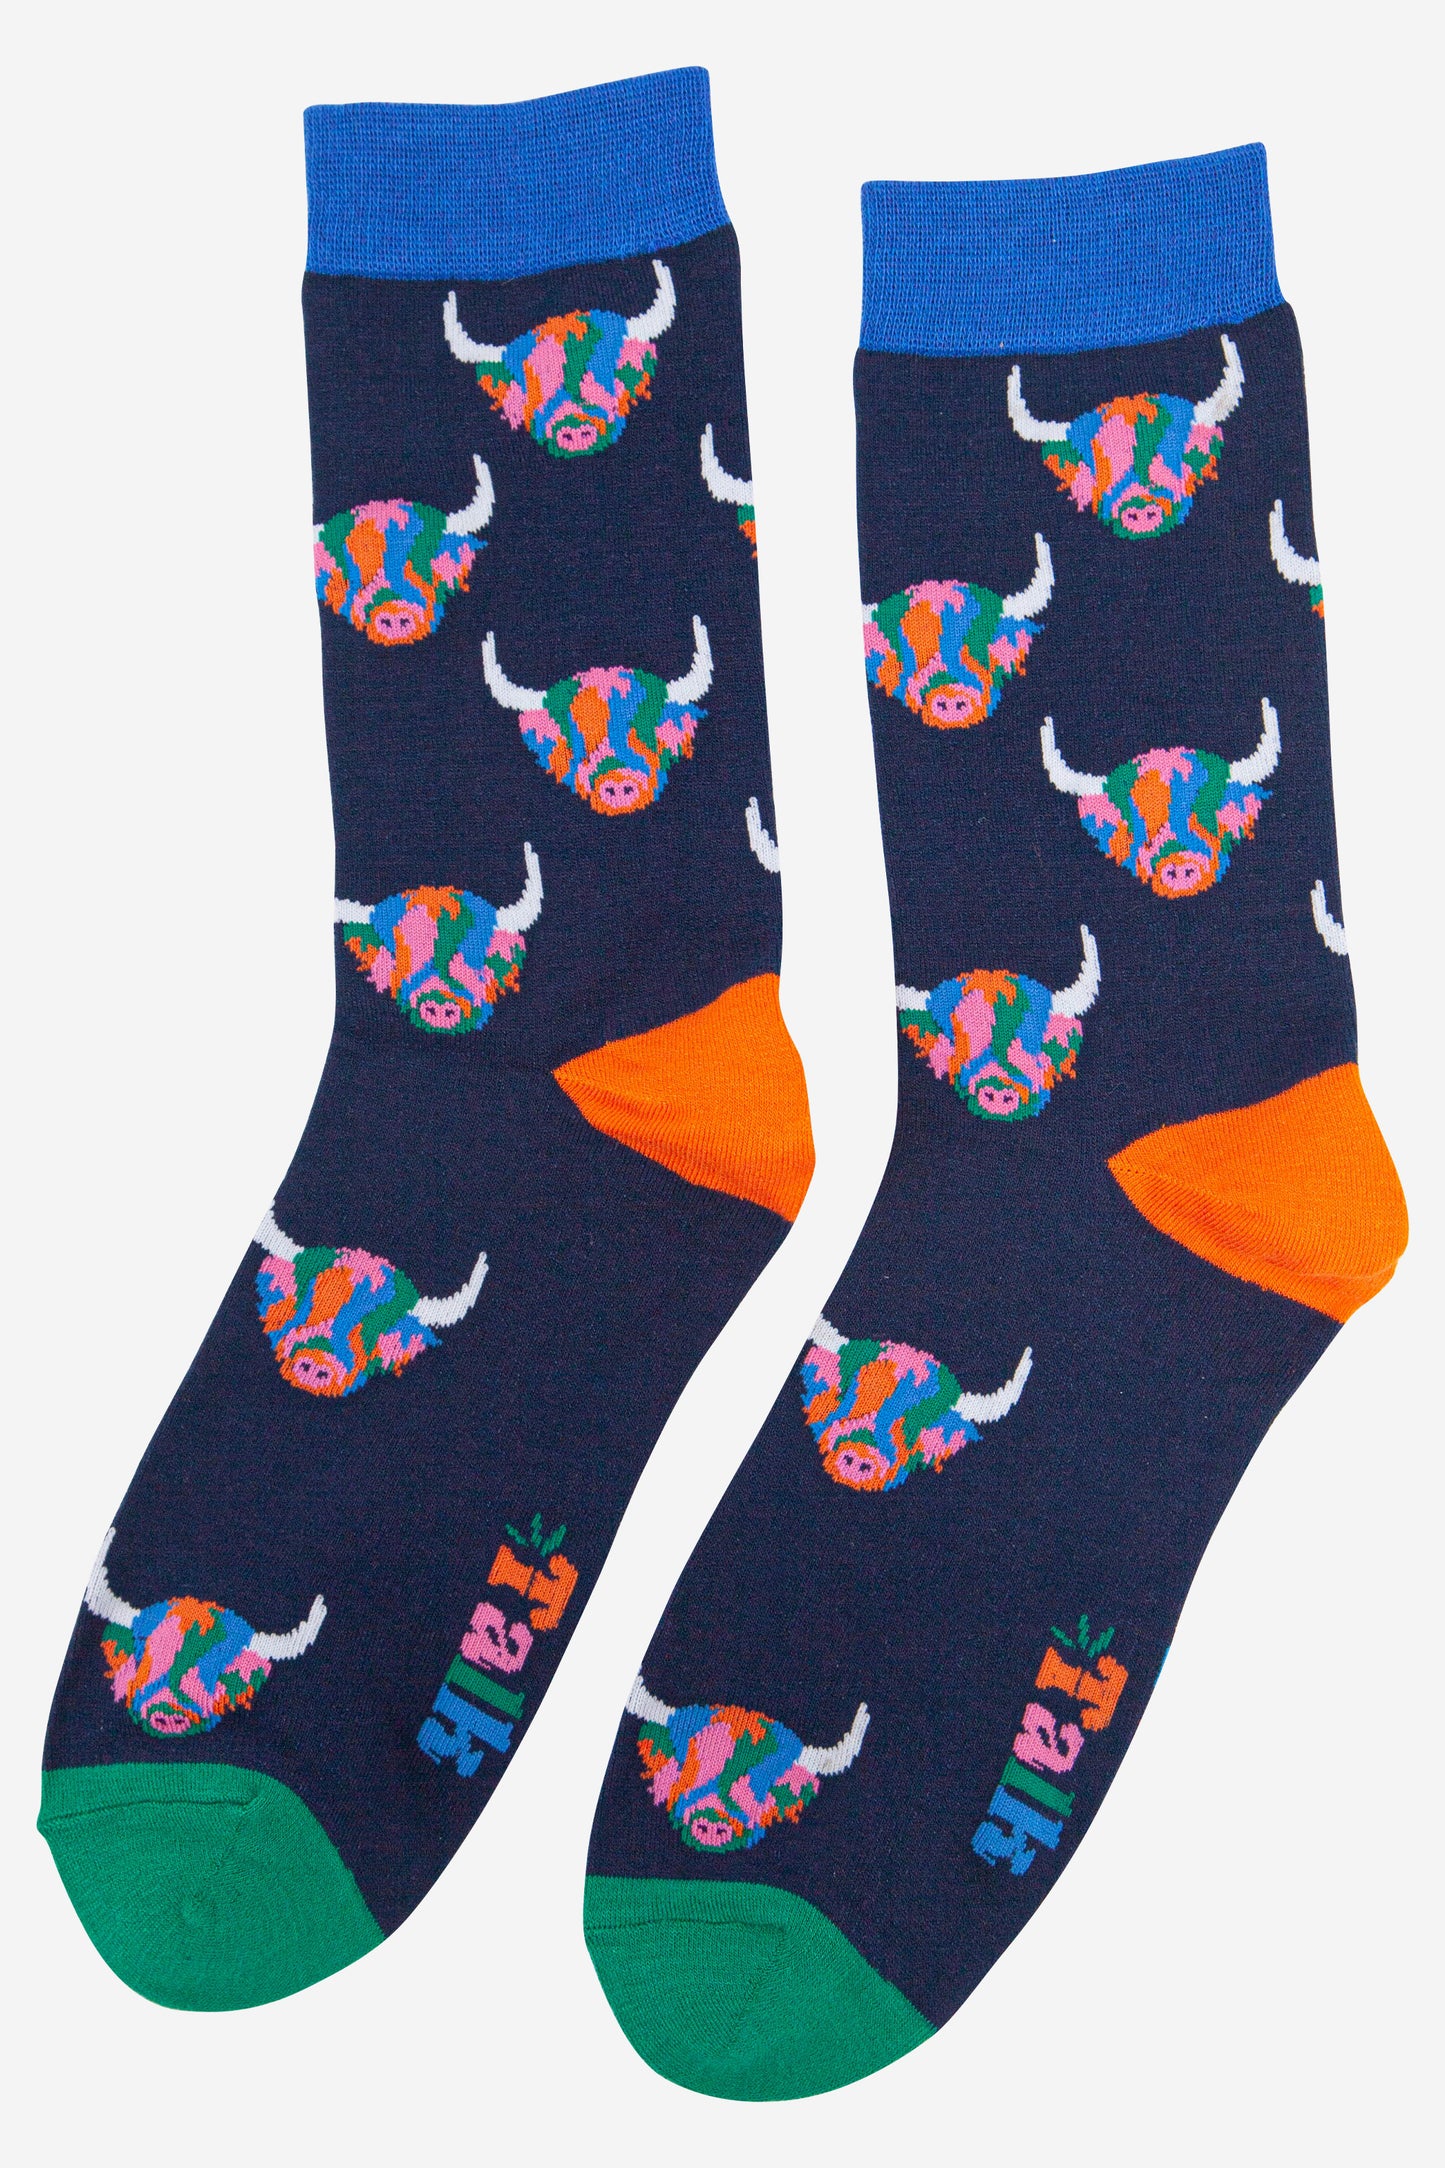 navy blue socks with light blue cuff, orange heel and green toe with an all over rainbow highland cow pattern